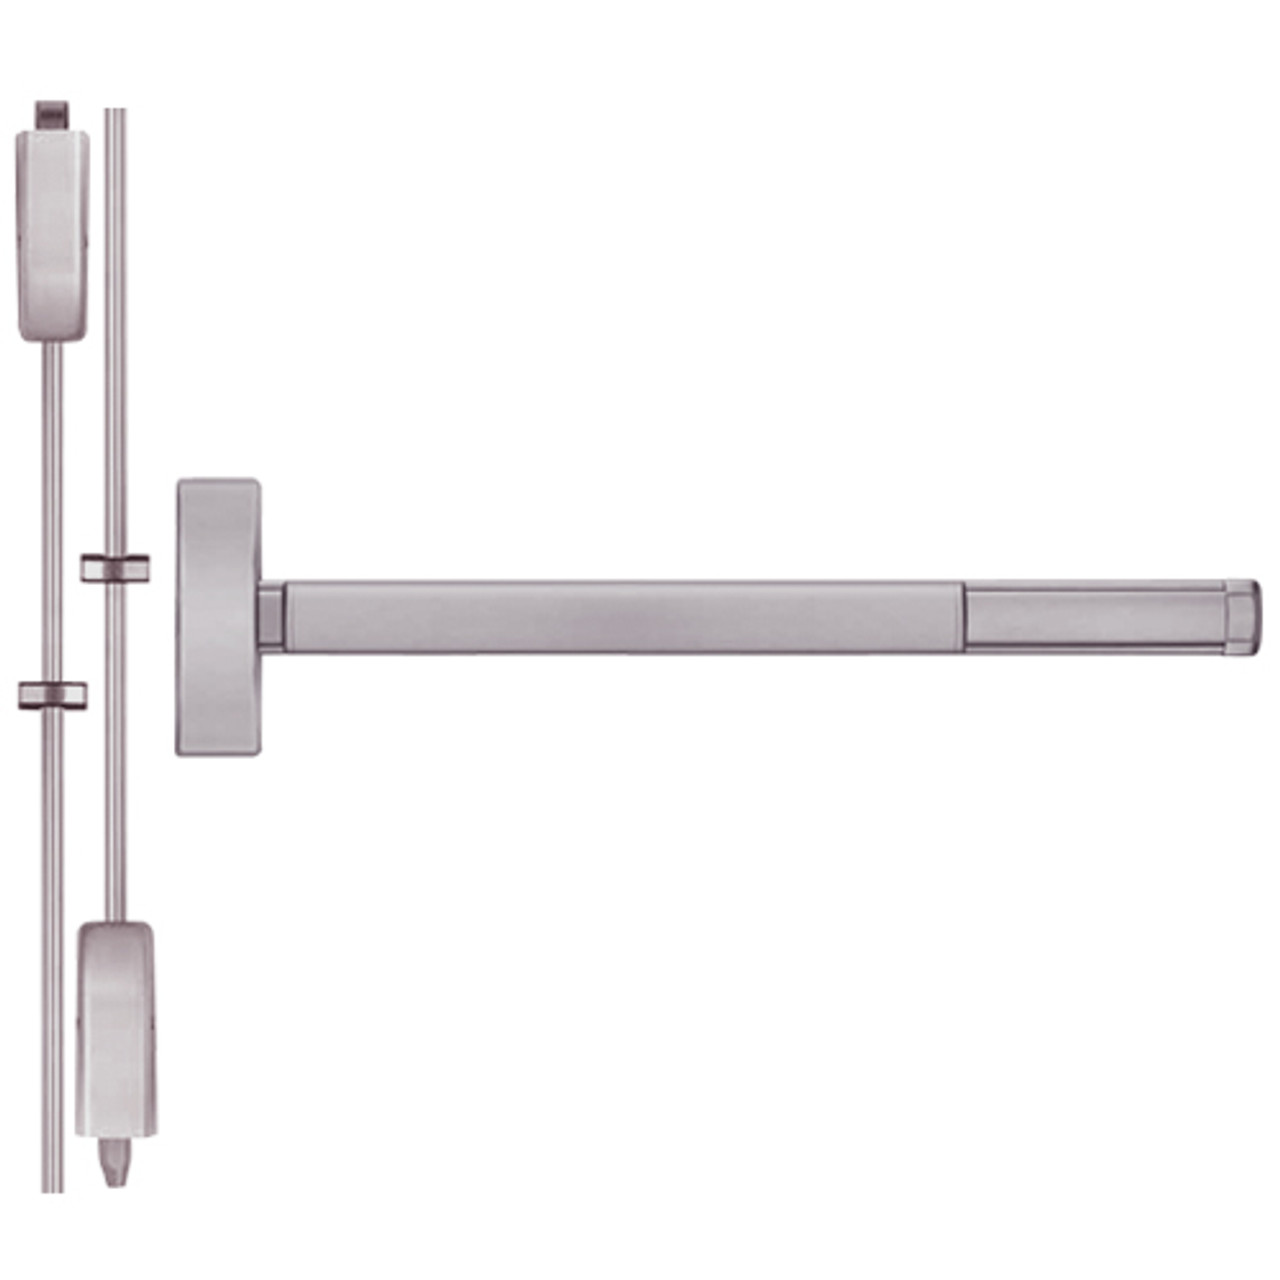 2203LBR-630-48 PHI 2200 Series Non Fire Rated Apex Surface Vertical Rod Device Prepped for Key Retracts Latchbolt in Satin Stainless Steel Finish